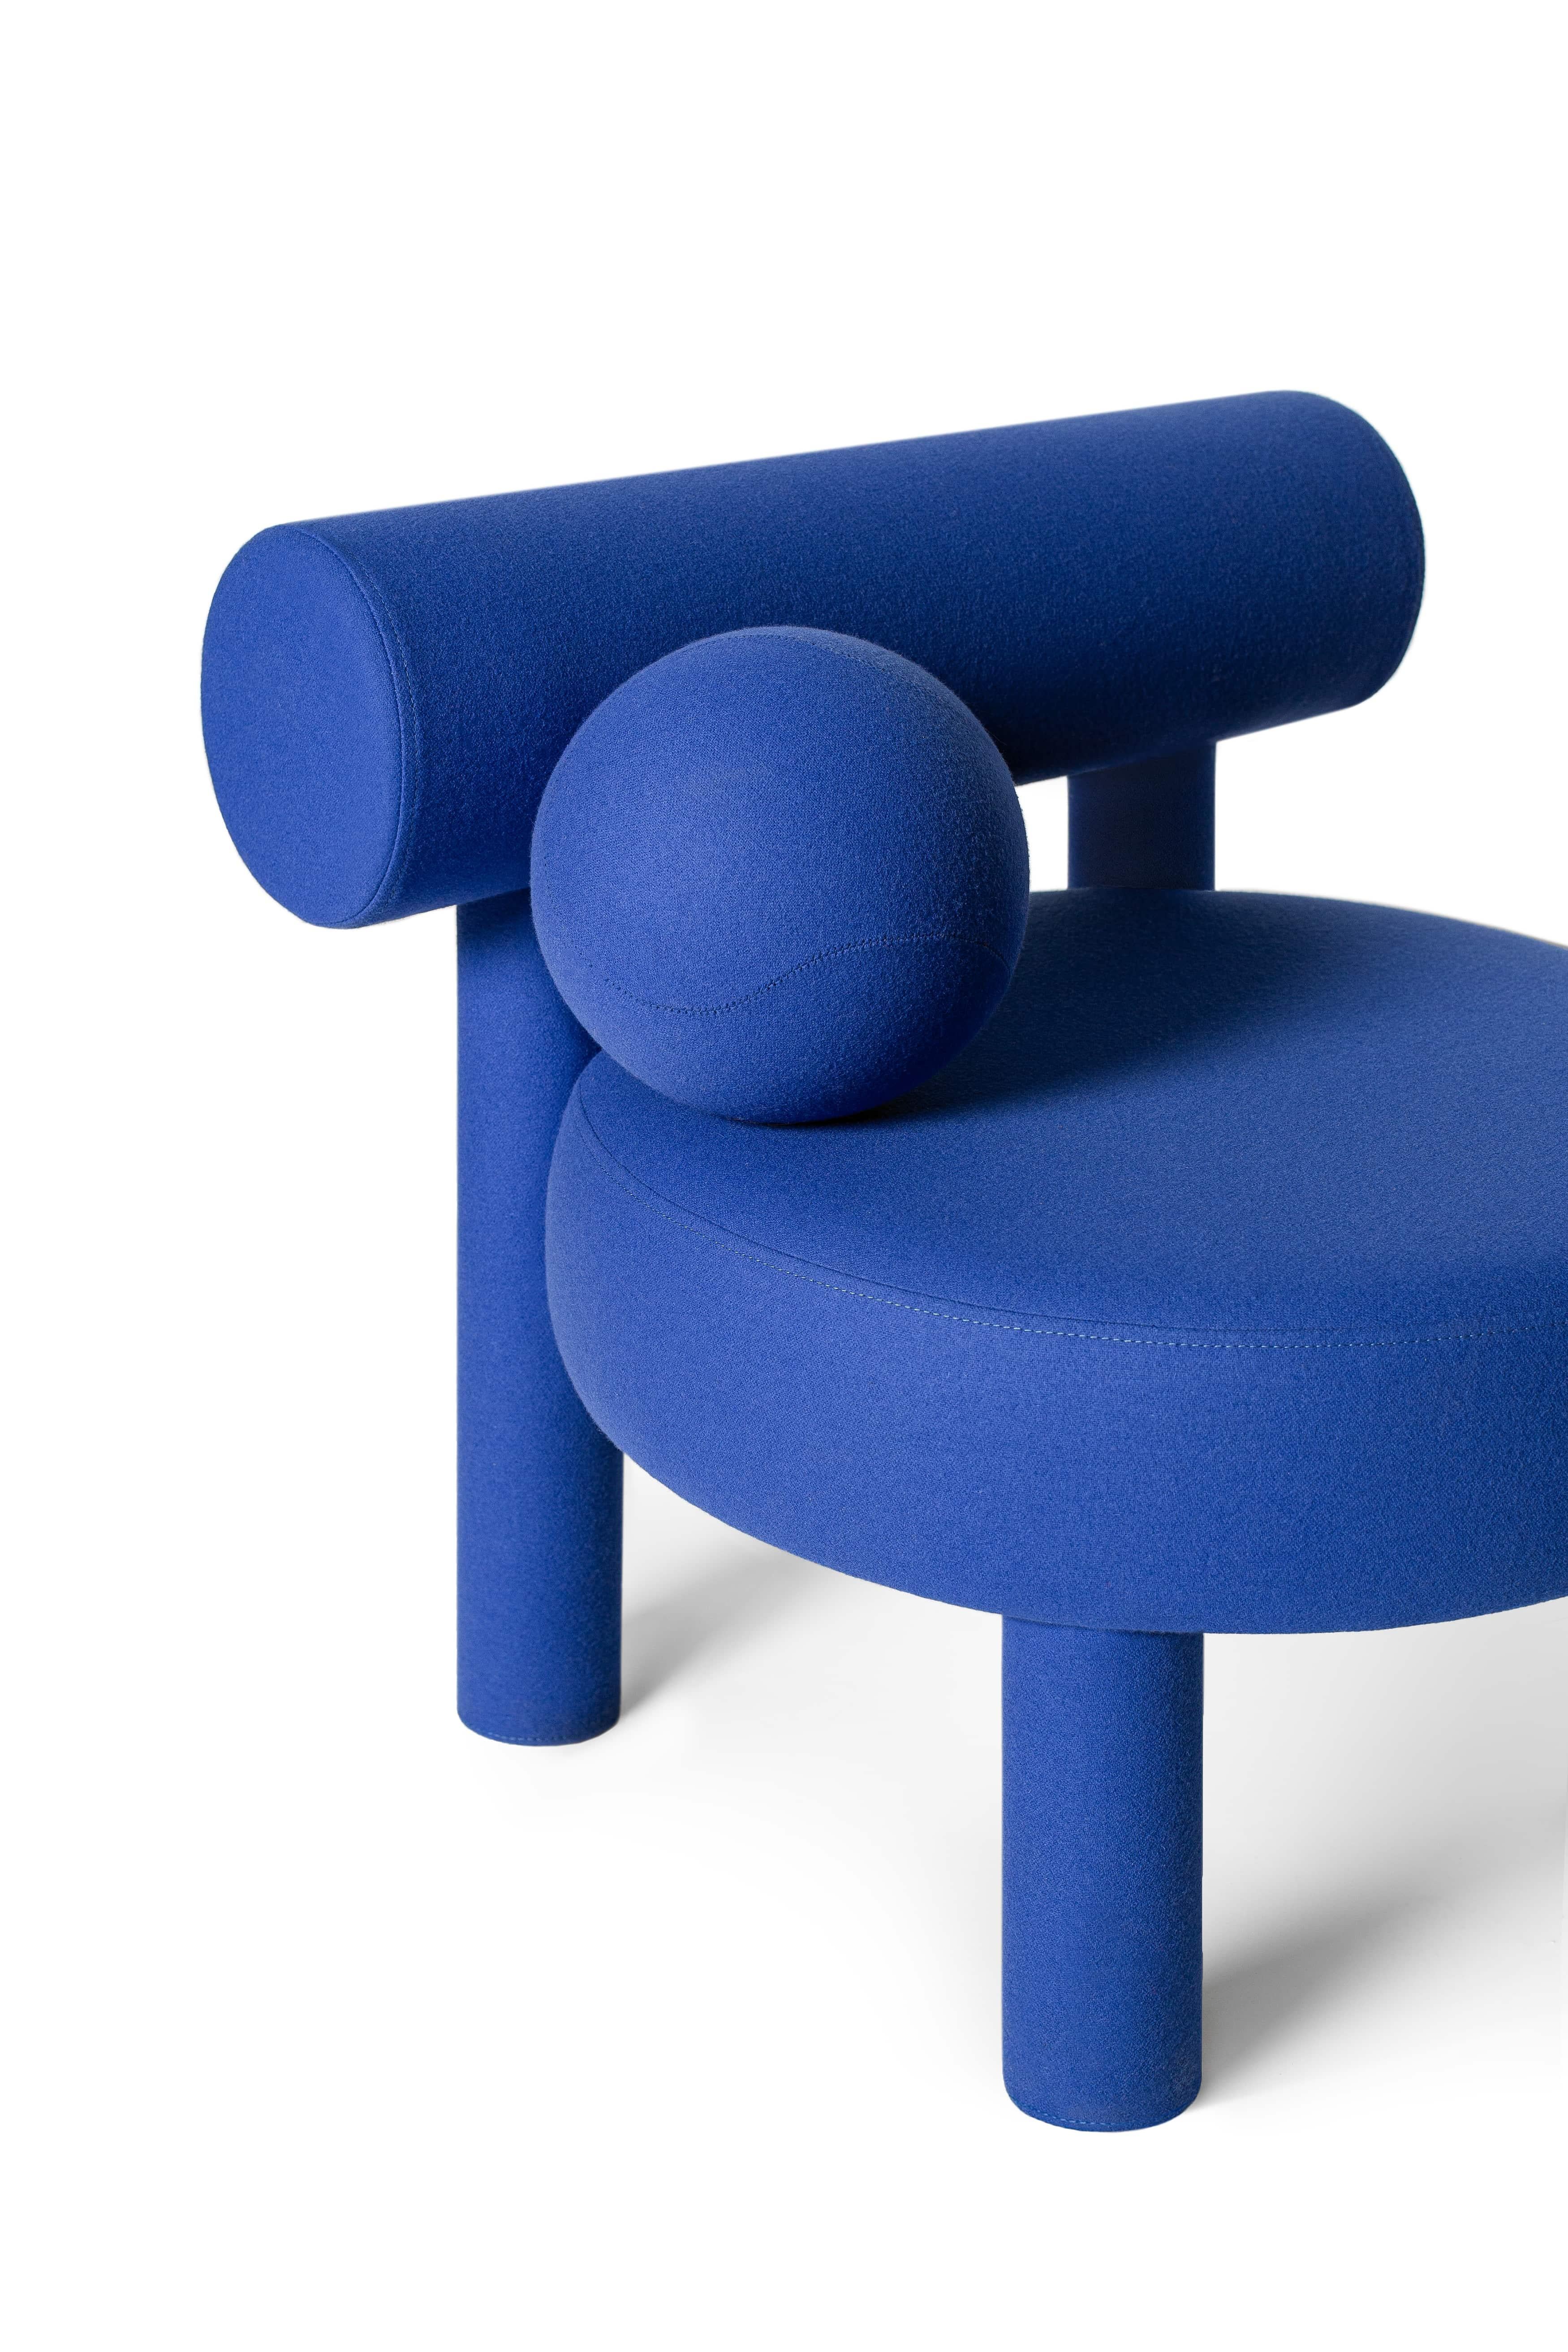 Contemporary Low Chair 'Gropius CS1' by NOOM, Blue For Sale 3